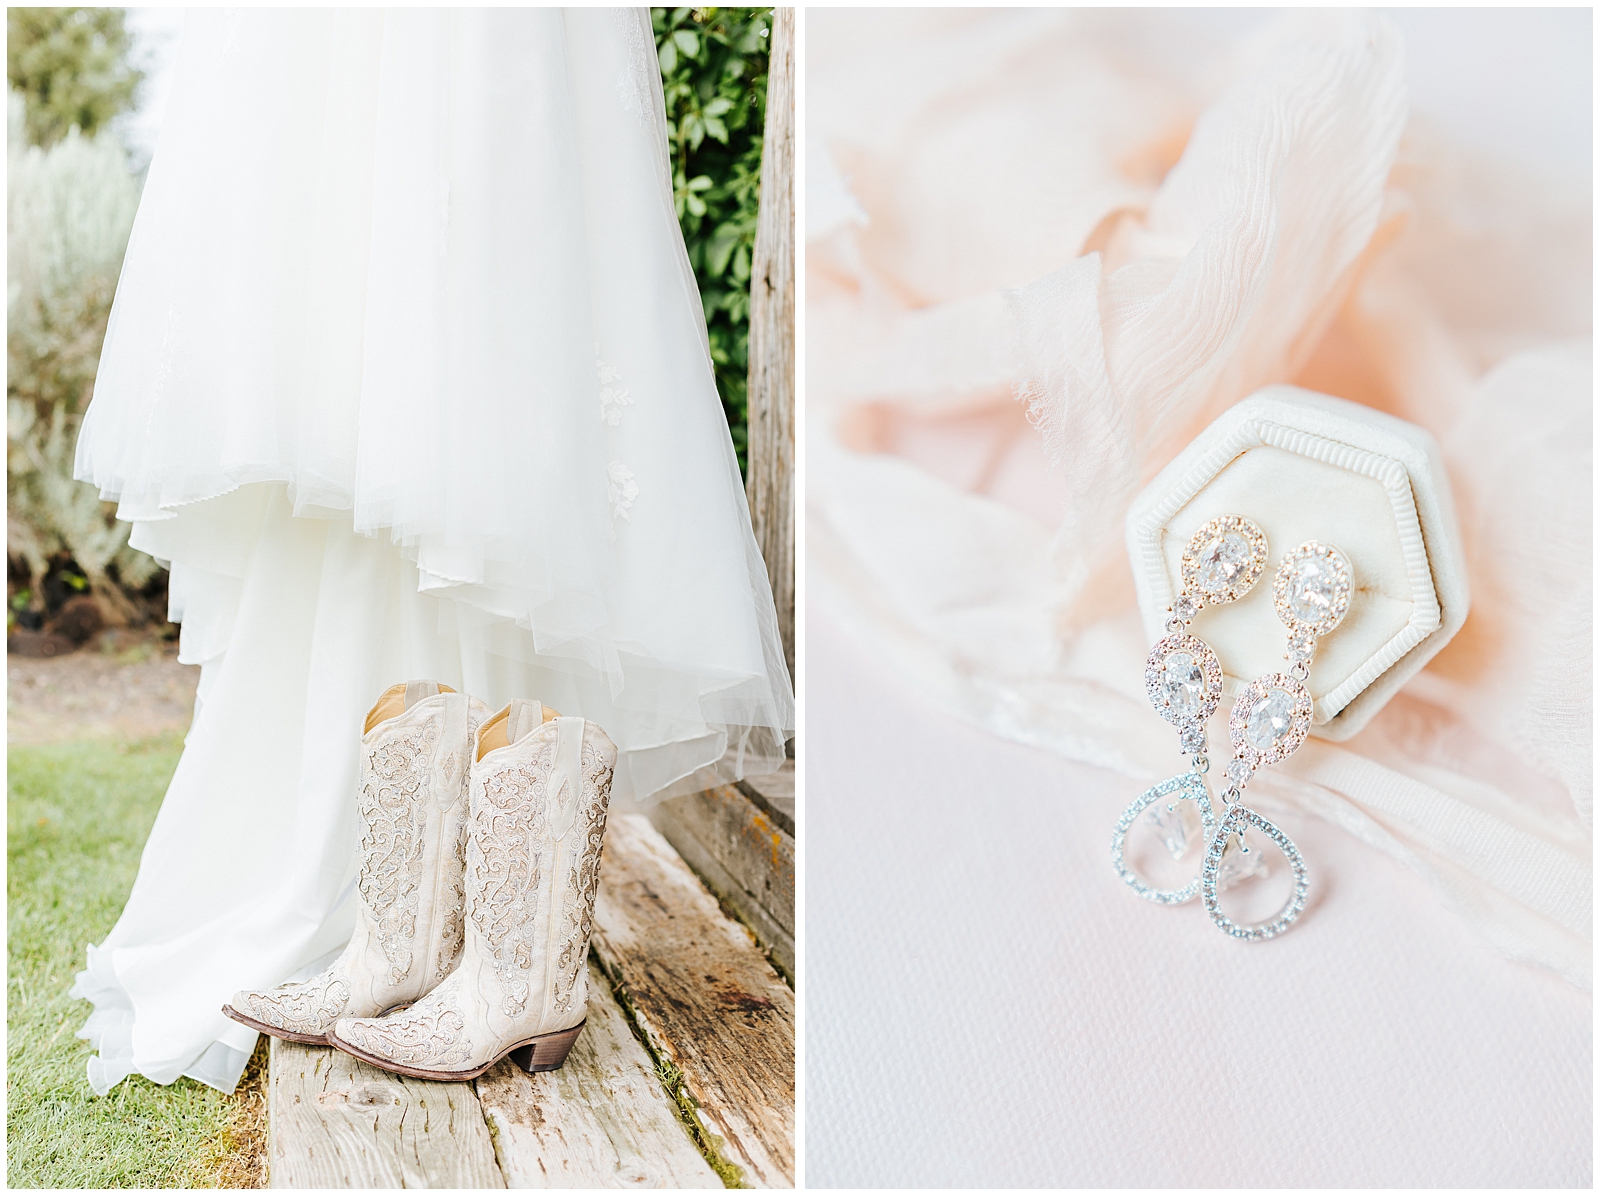 Bridal Details at Rustic Chic Still Water Hollow Wedding